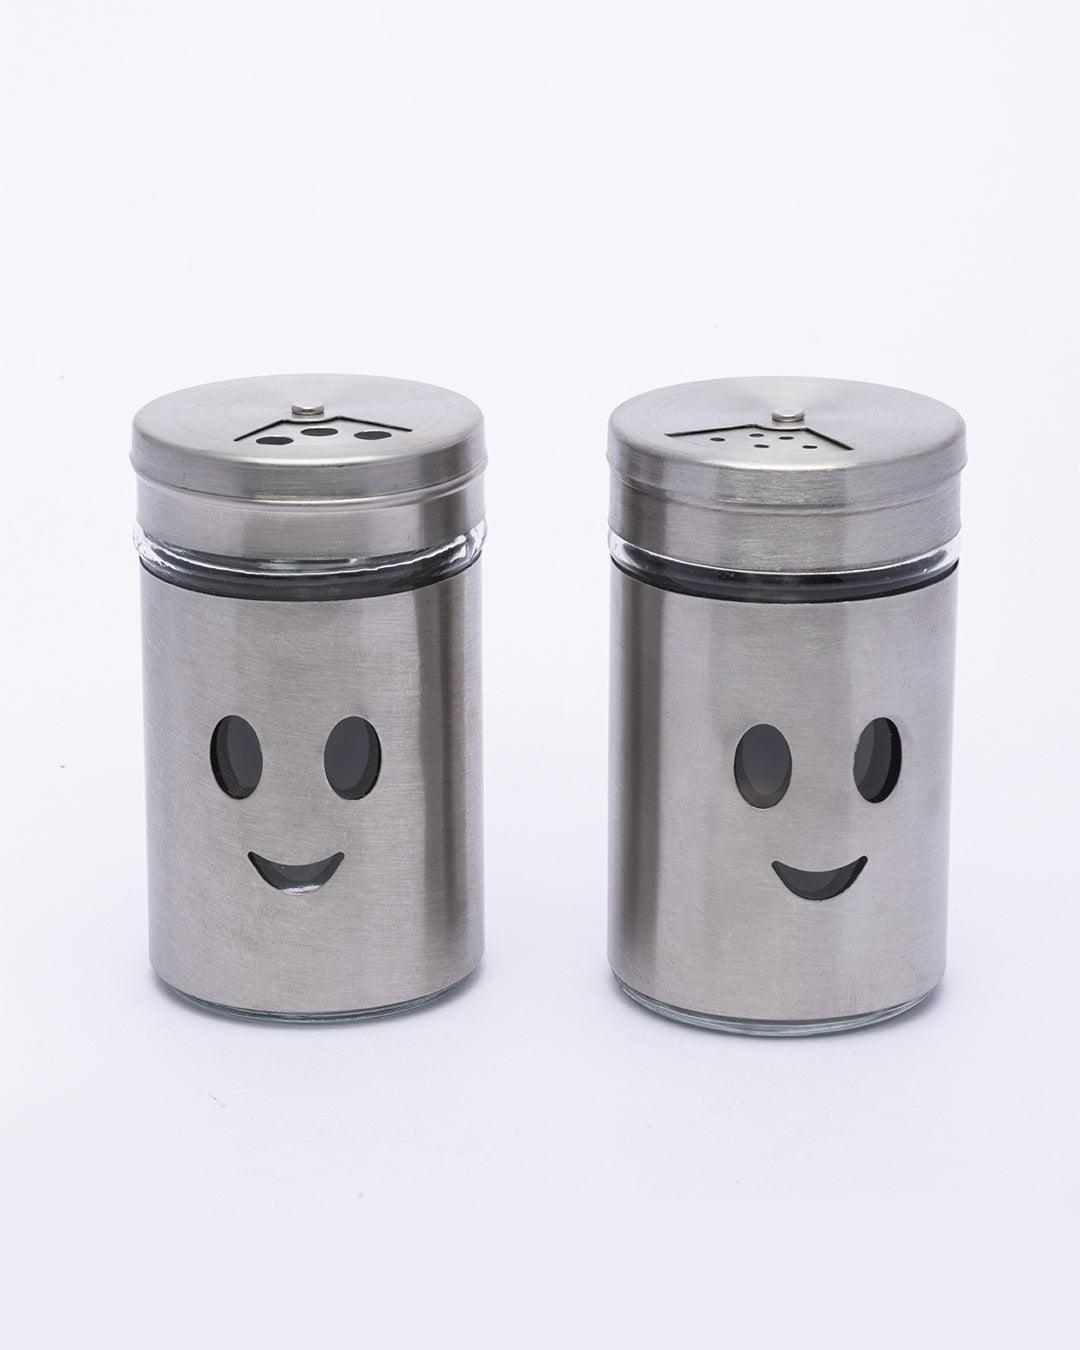 Salt and Pepper Shakers Online @Upto 70% OFF